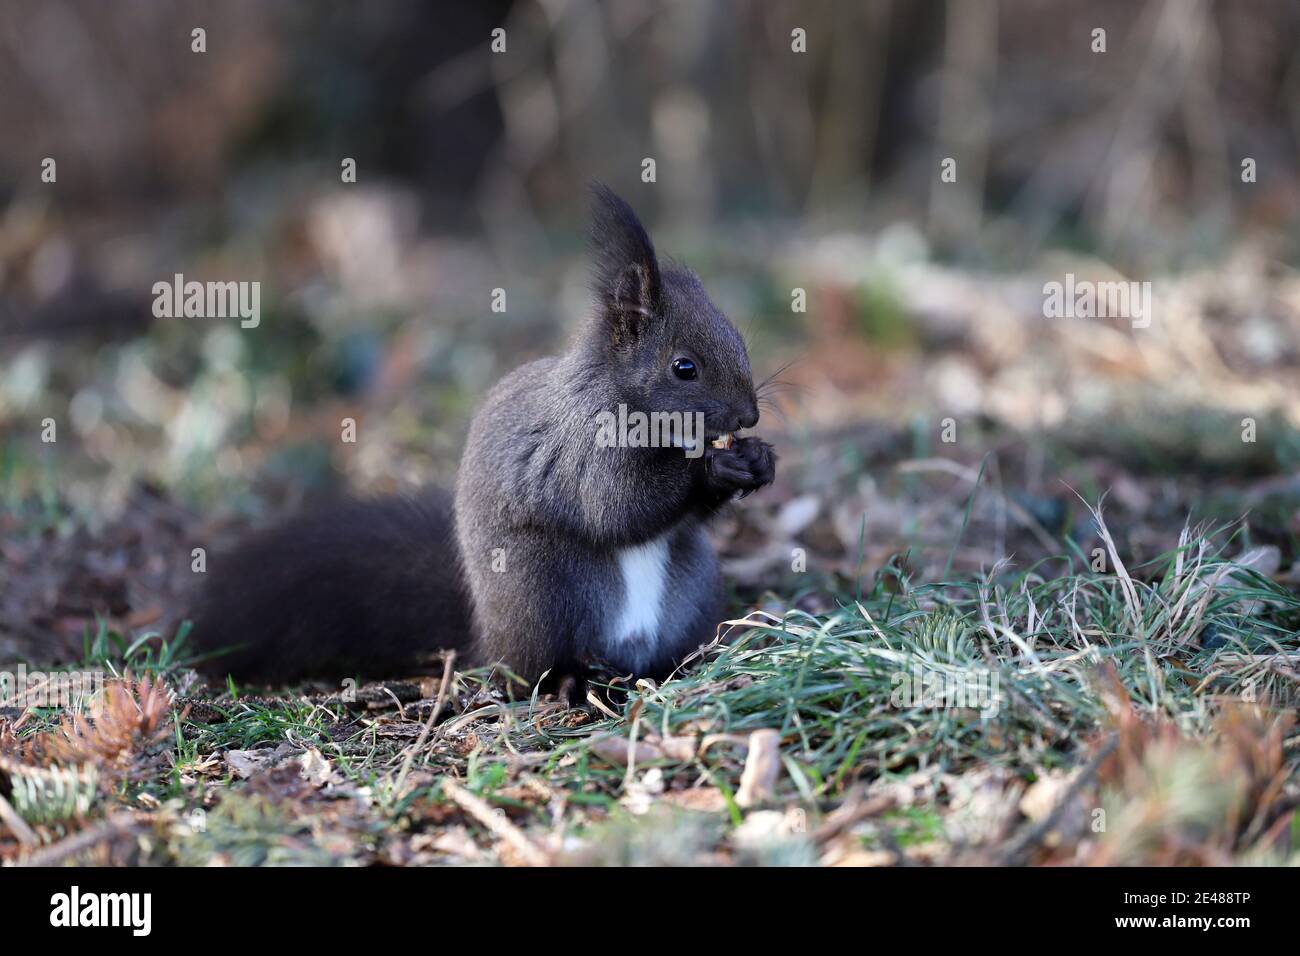 Squirrel eats a nut on a natural background Stock Photo